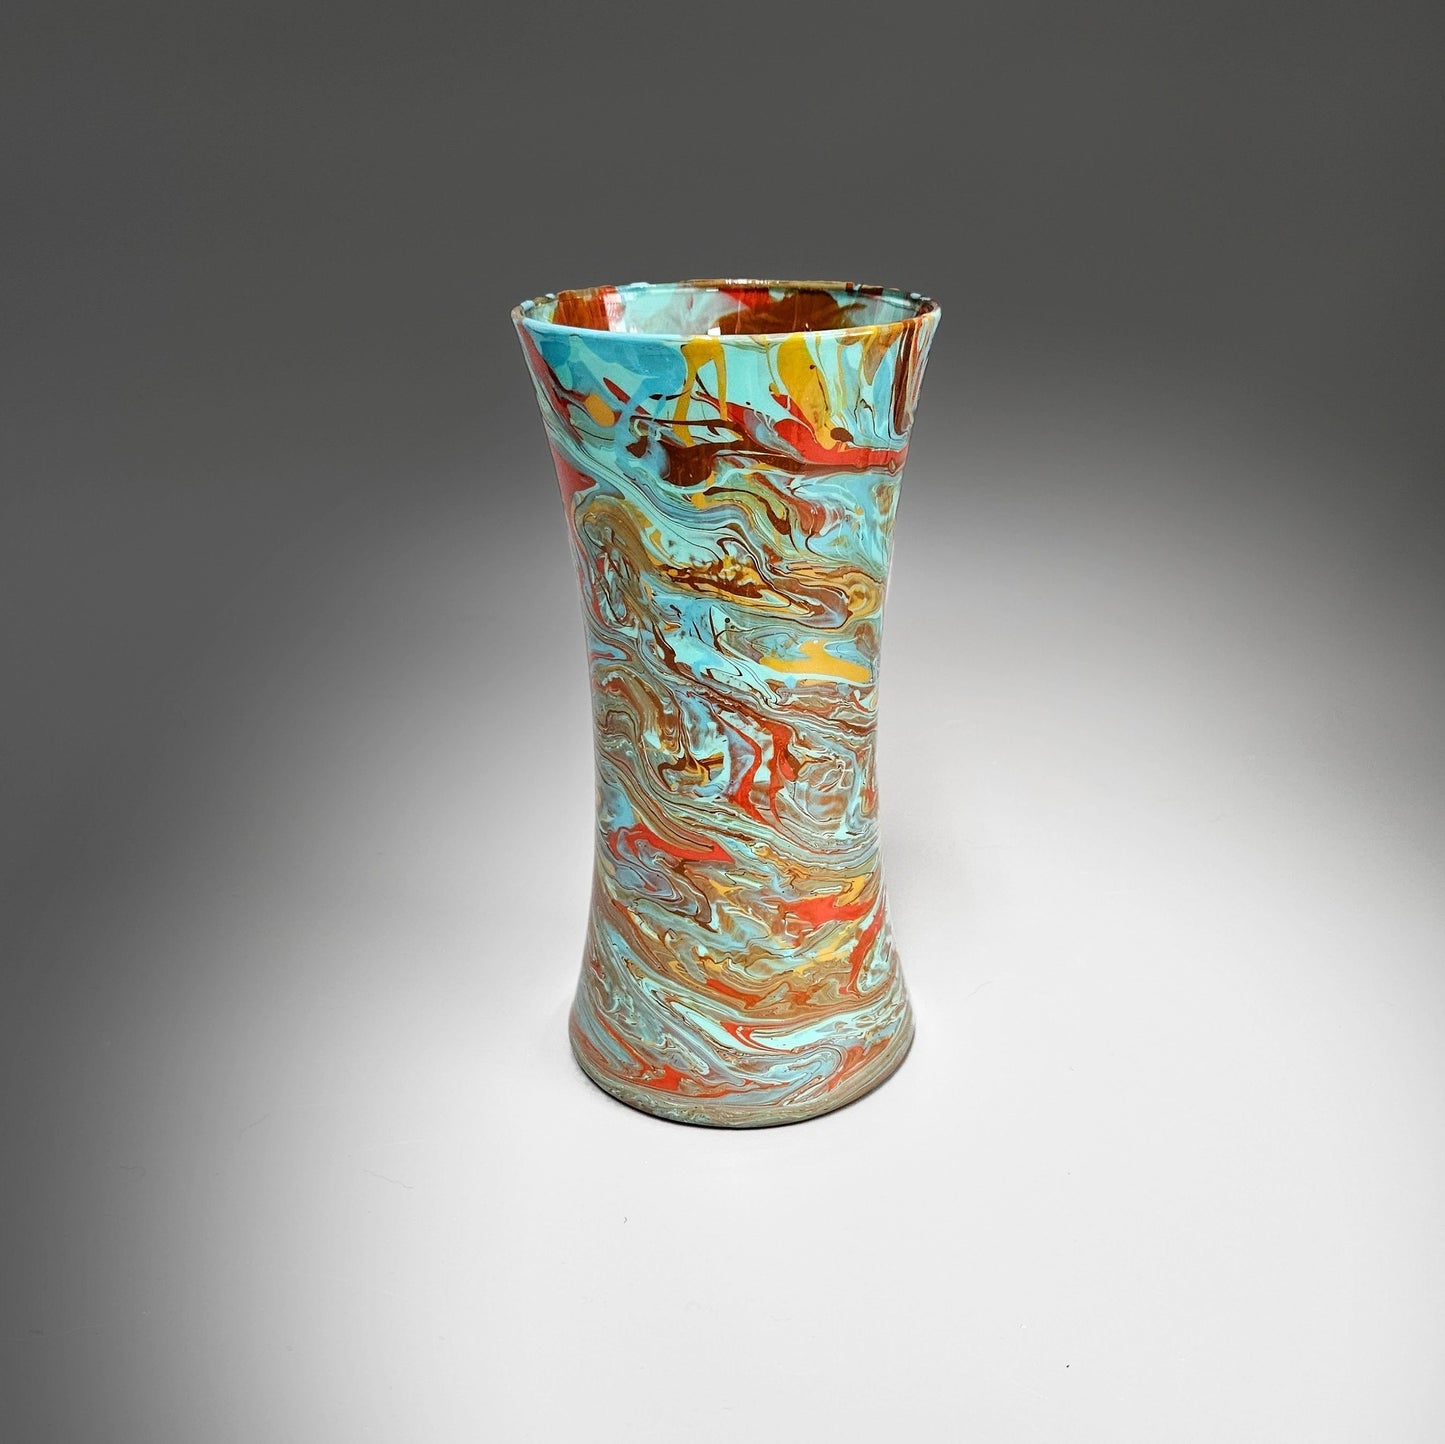 Abstract Painted Glass Vase in Southwest Colors